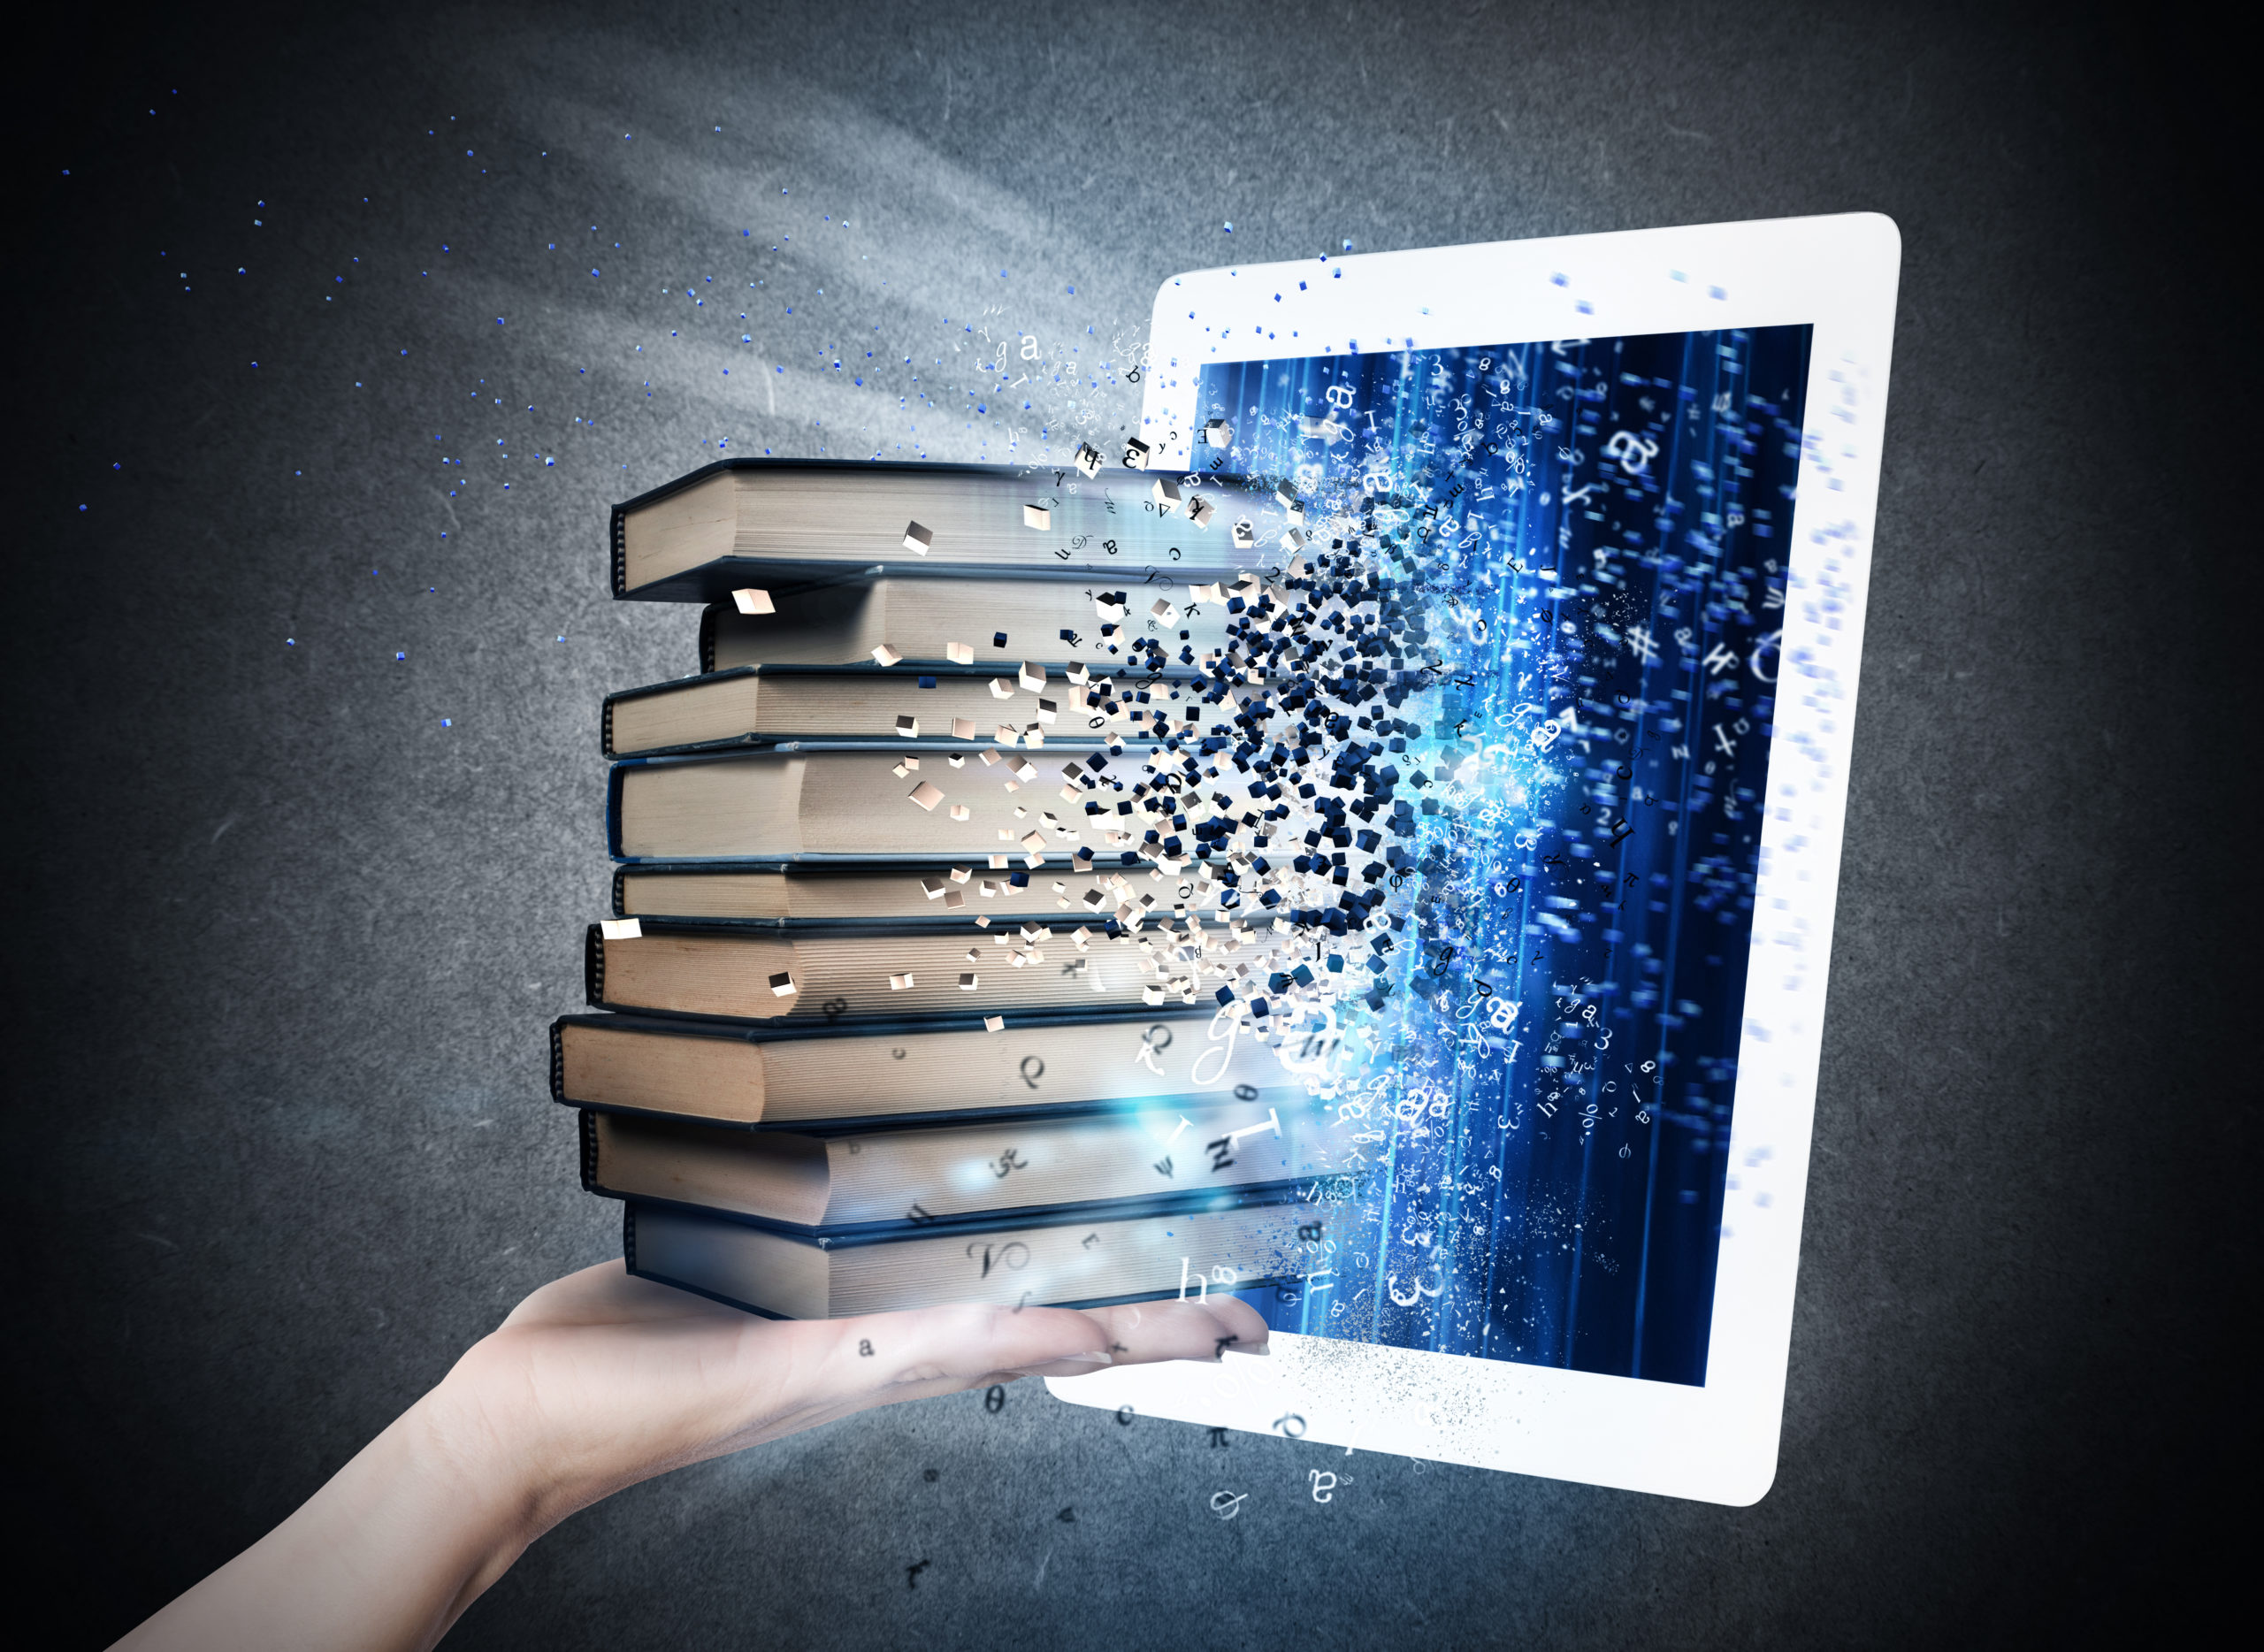 Impact of Digital Transformation on the Future of Library Work